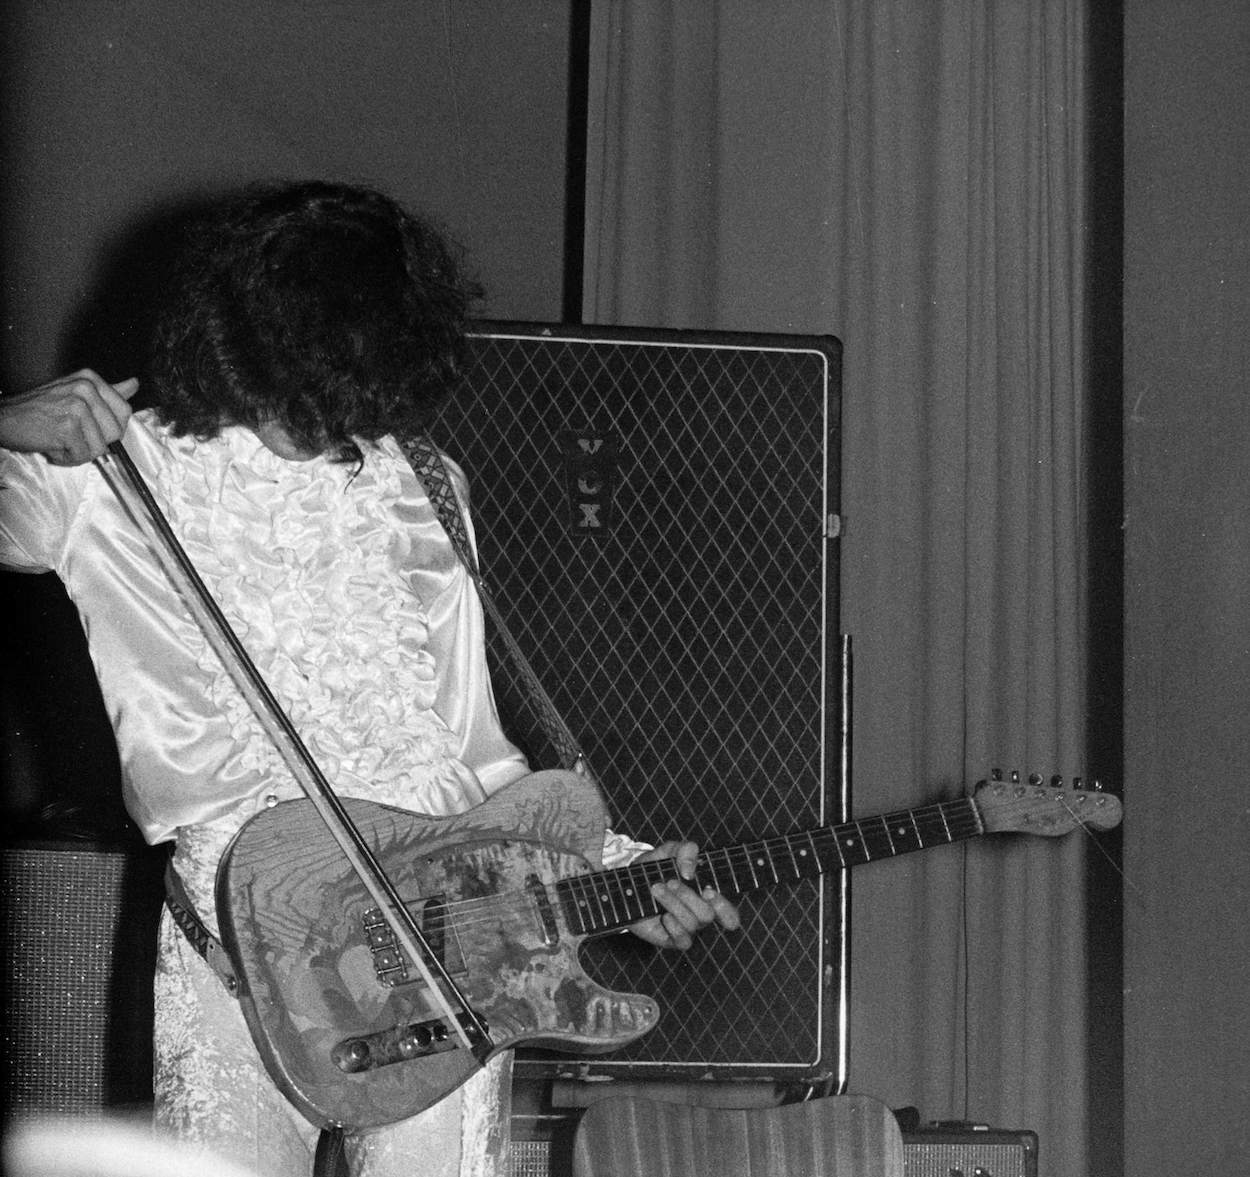 Jimmy Page performing during the first Led Zeppelin concert in Denmark in 1968. Page once said Led Zeppelin's debut album came together in a short amount of time as they worked quickly and recorded at night.